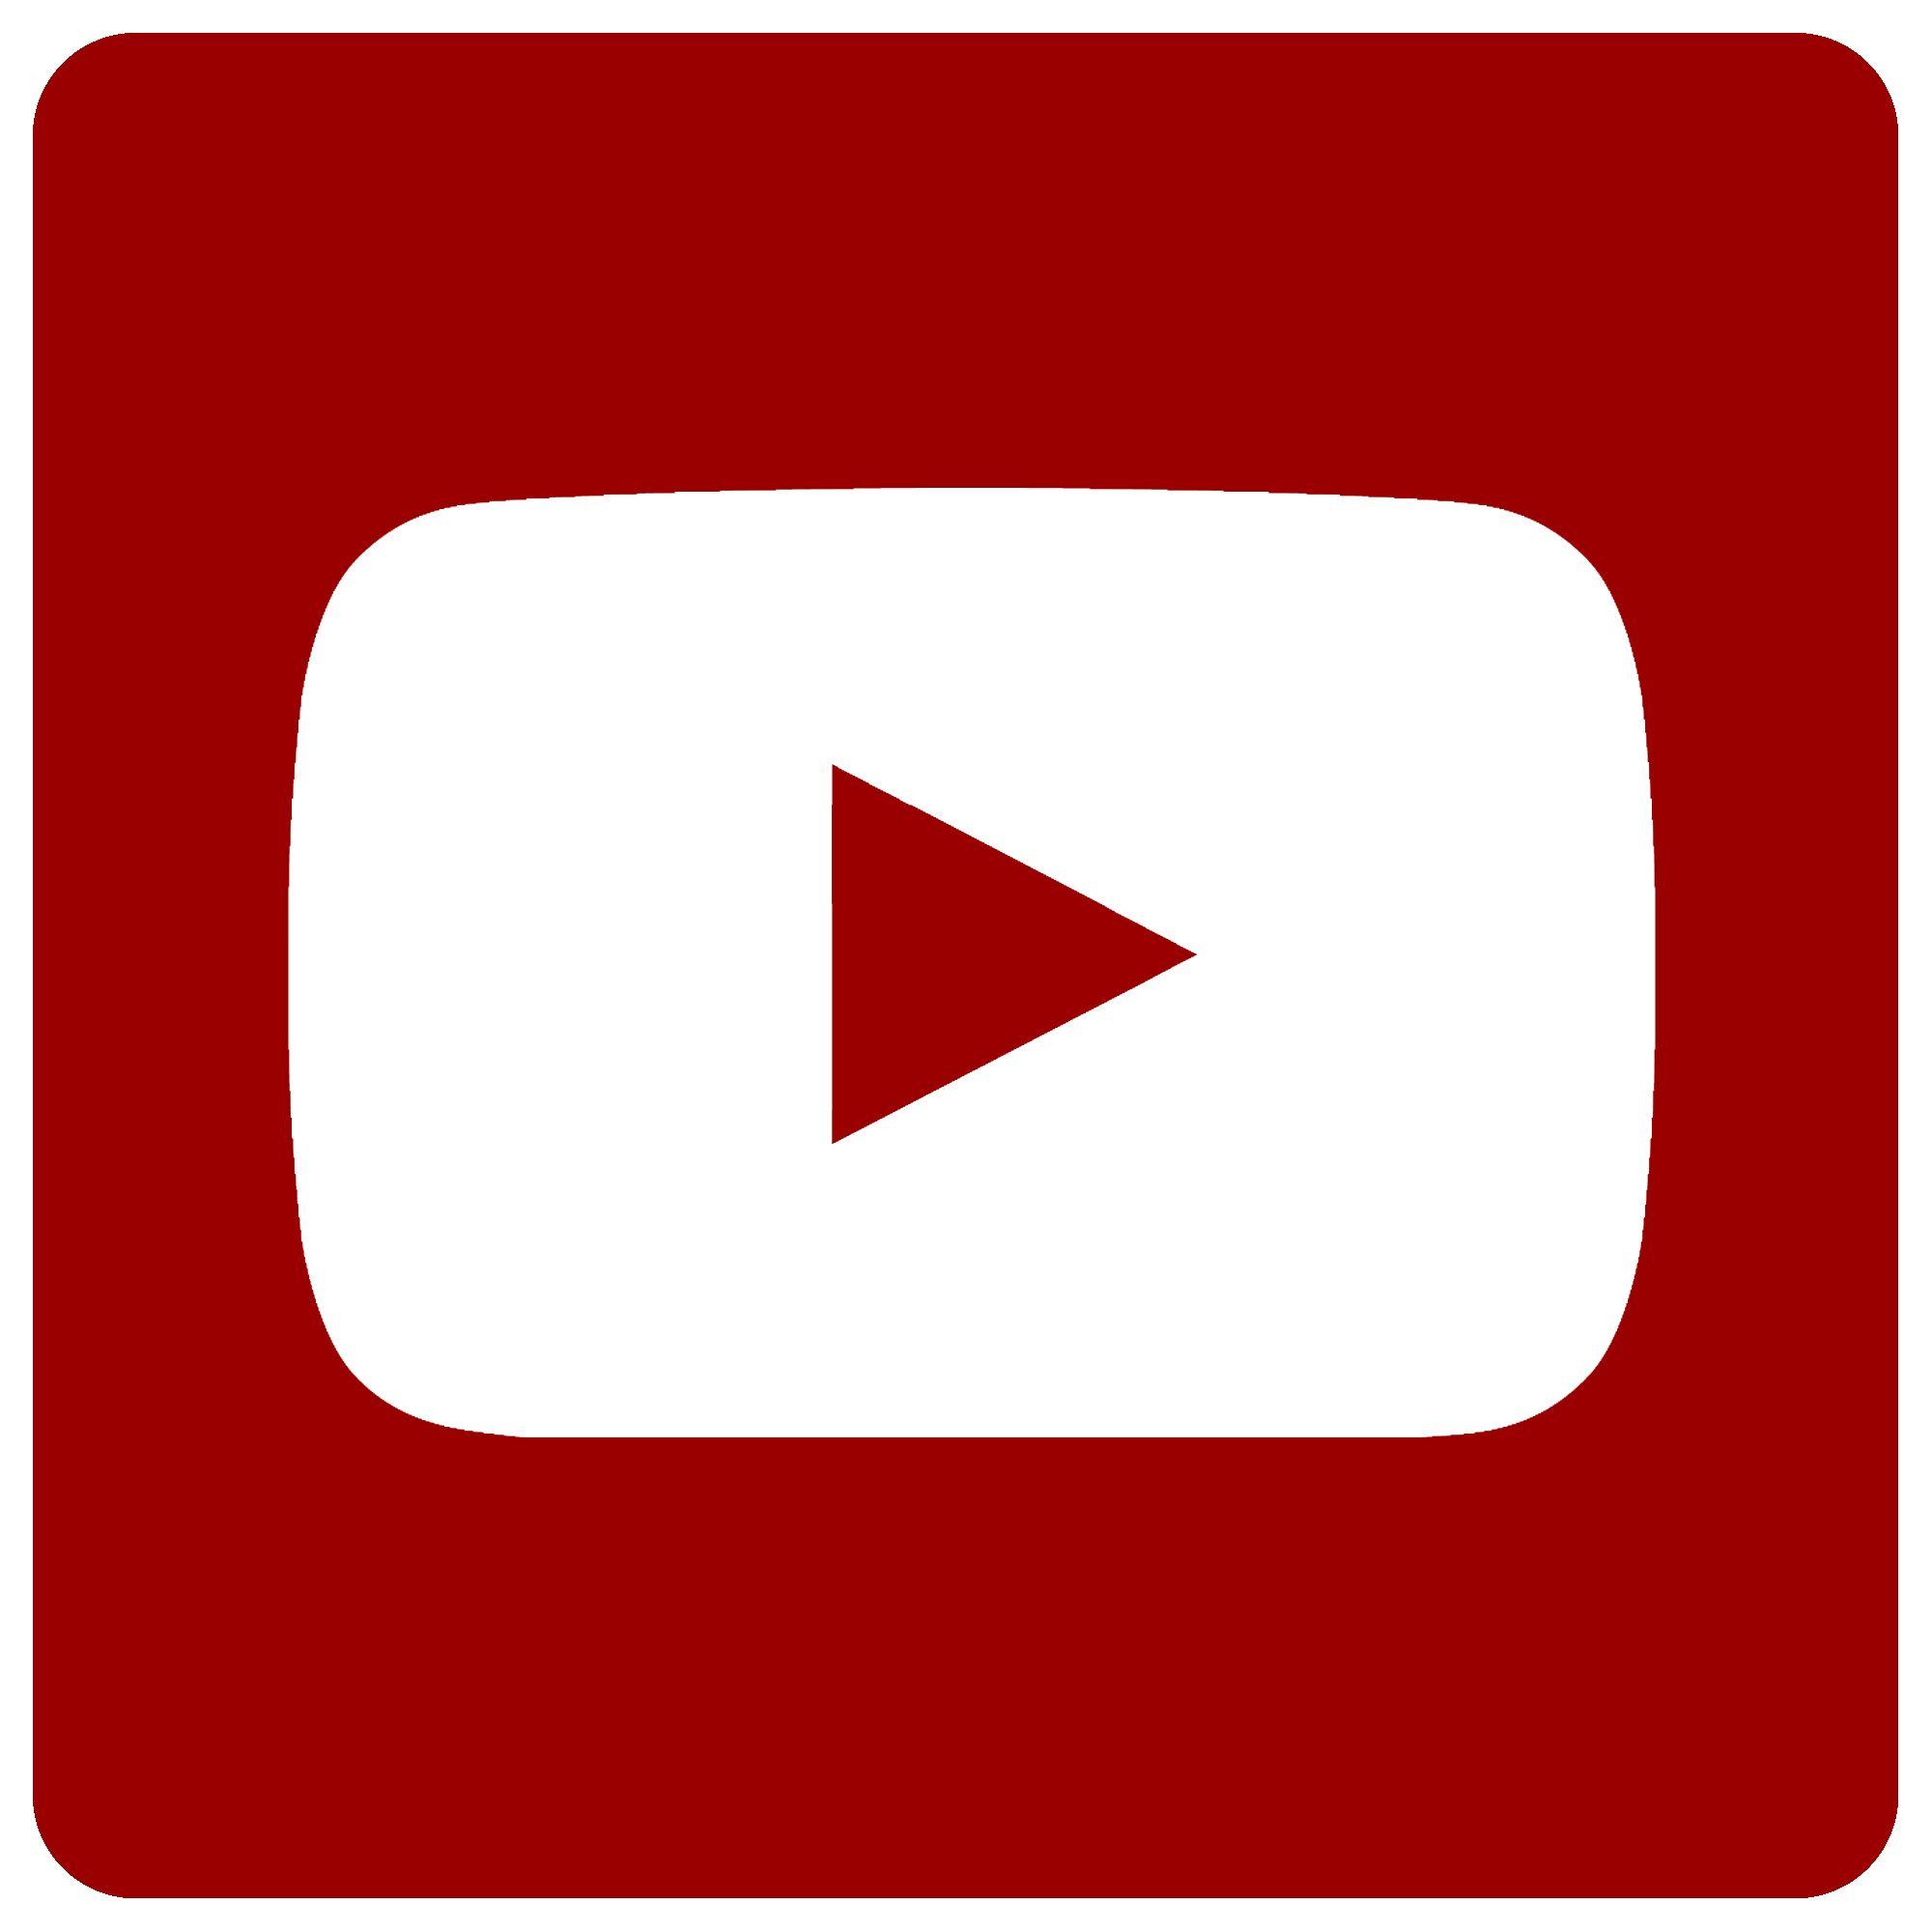 White YouTube Logo - YouTube Logo, YouTube Symbol, Meaning, History and Evolution